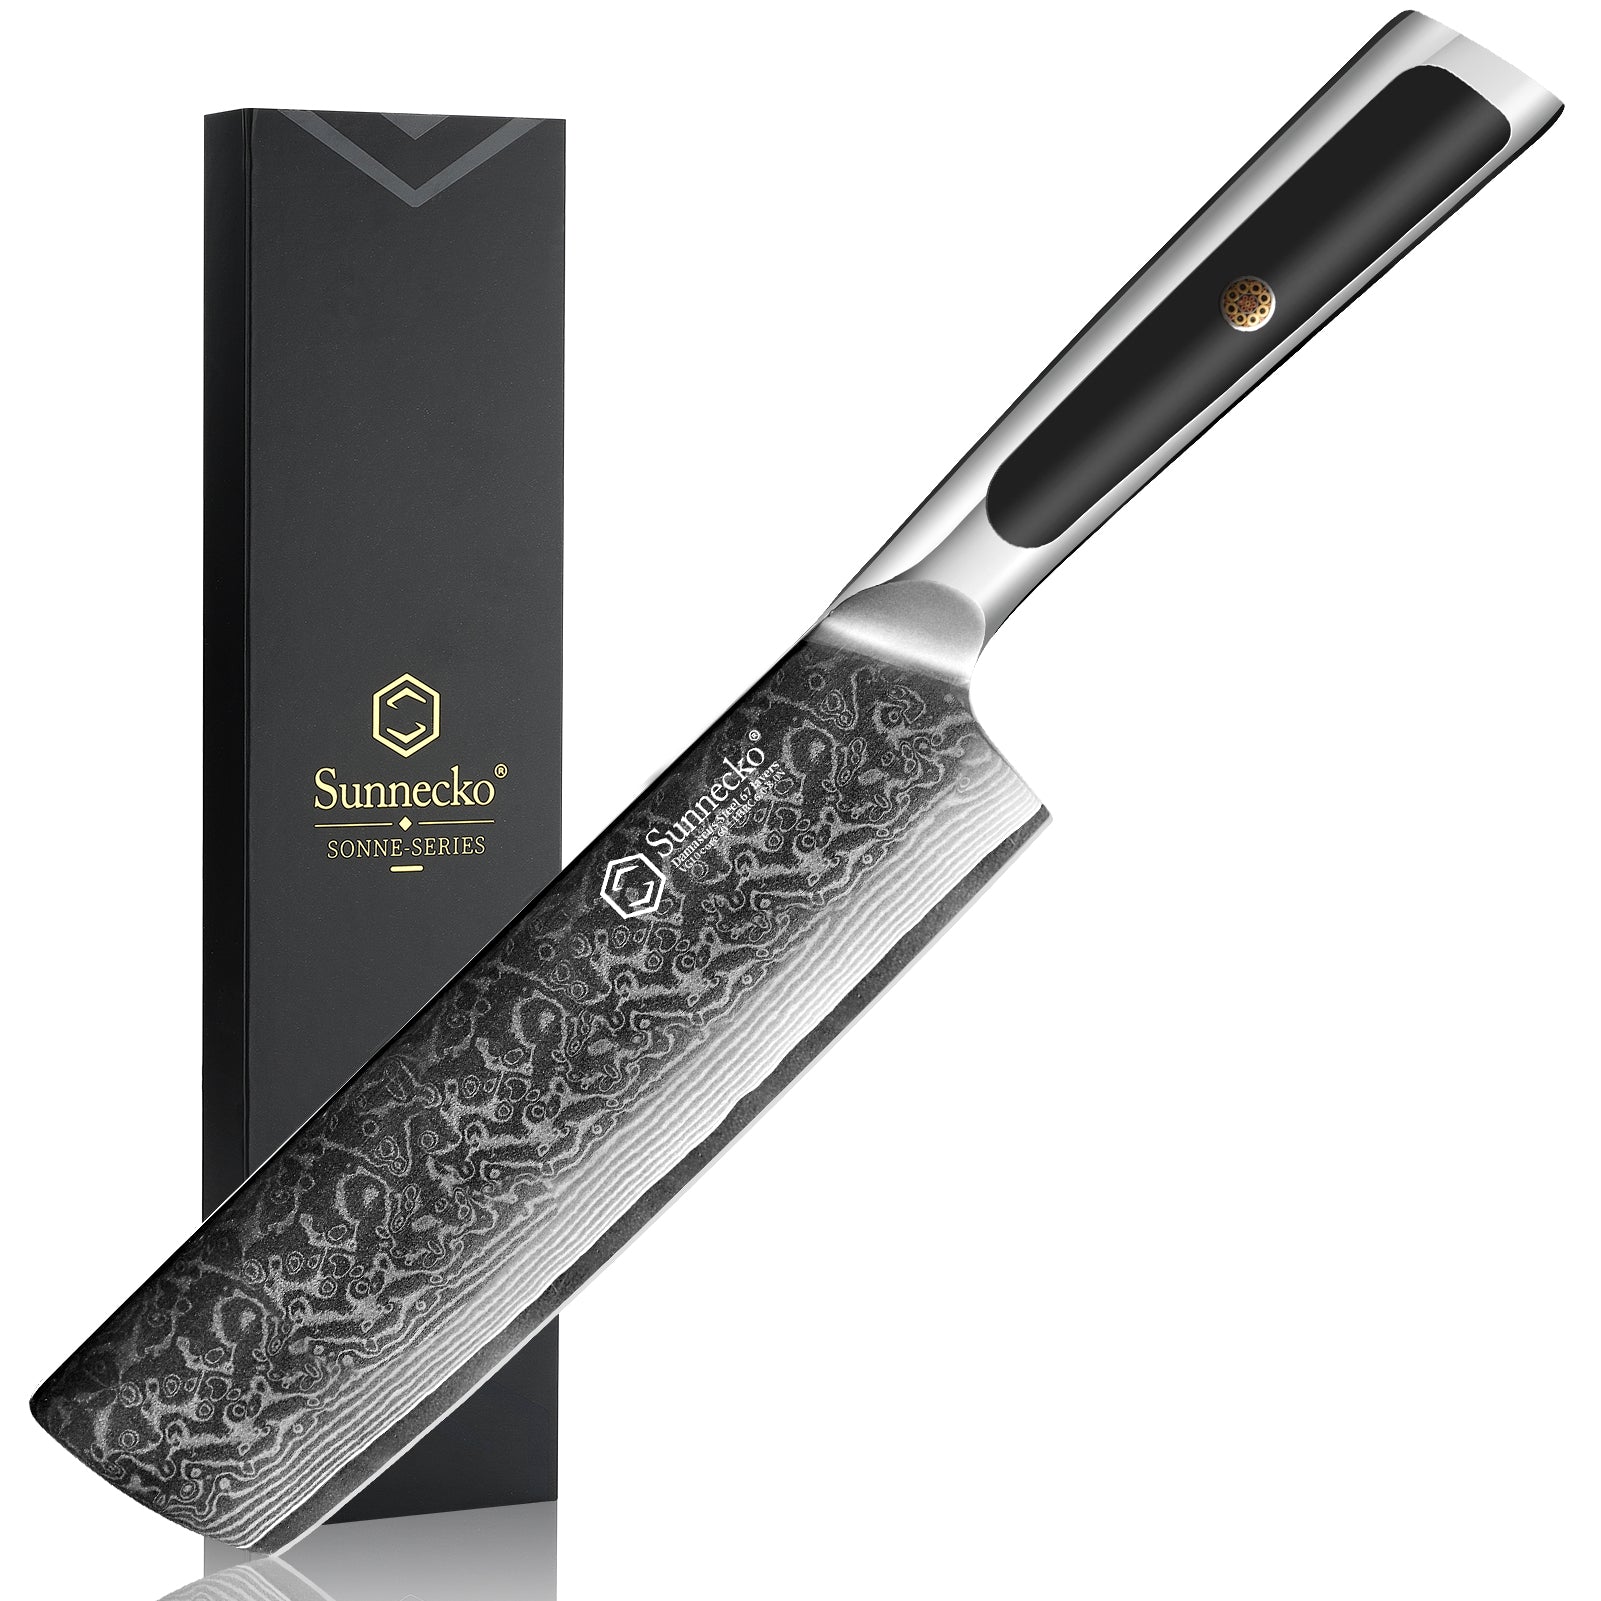 Nakiri Knife, 7 inch Japanese Vegetable Cleaver, VG-10 Stainless Steel  Damascus Blade with Pakkawood Handle - Handcrafted Chef Kitchen Knife 